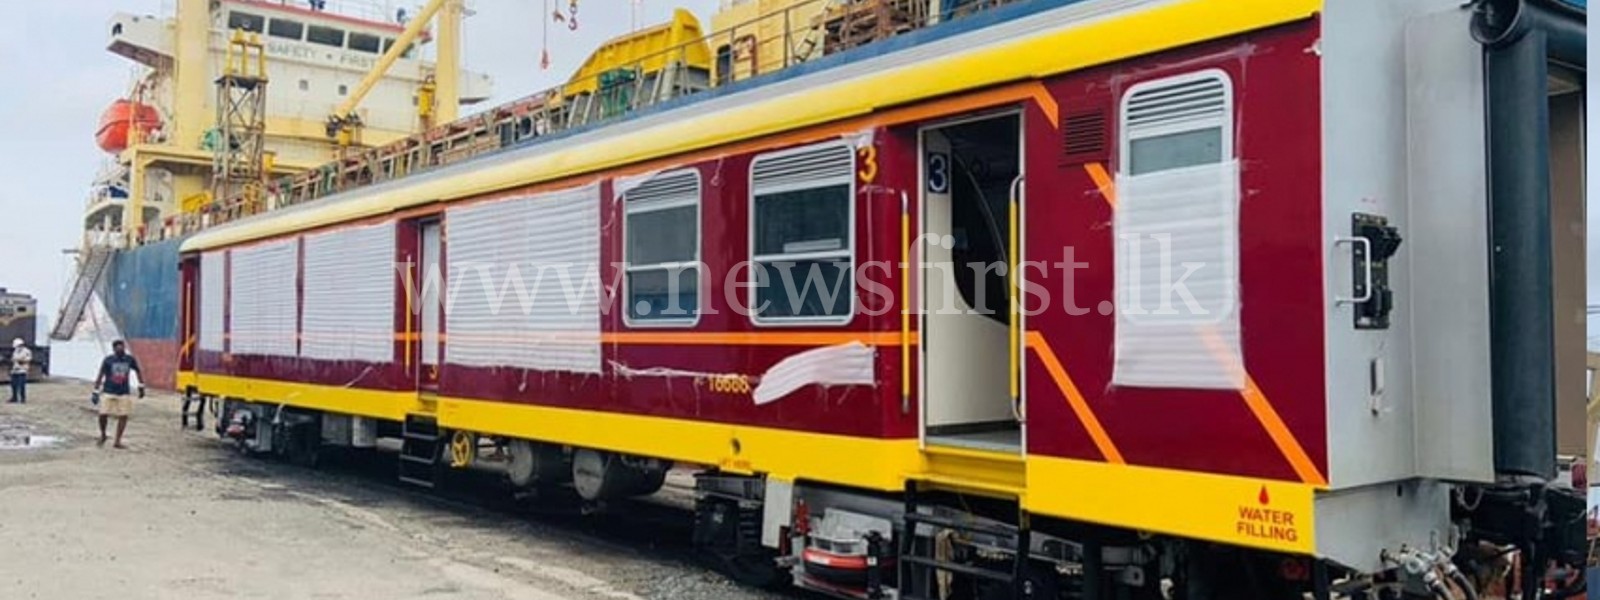 103 Indian train compartments NOT in use - COPA